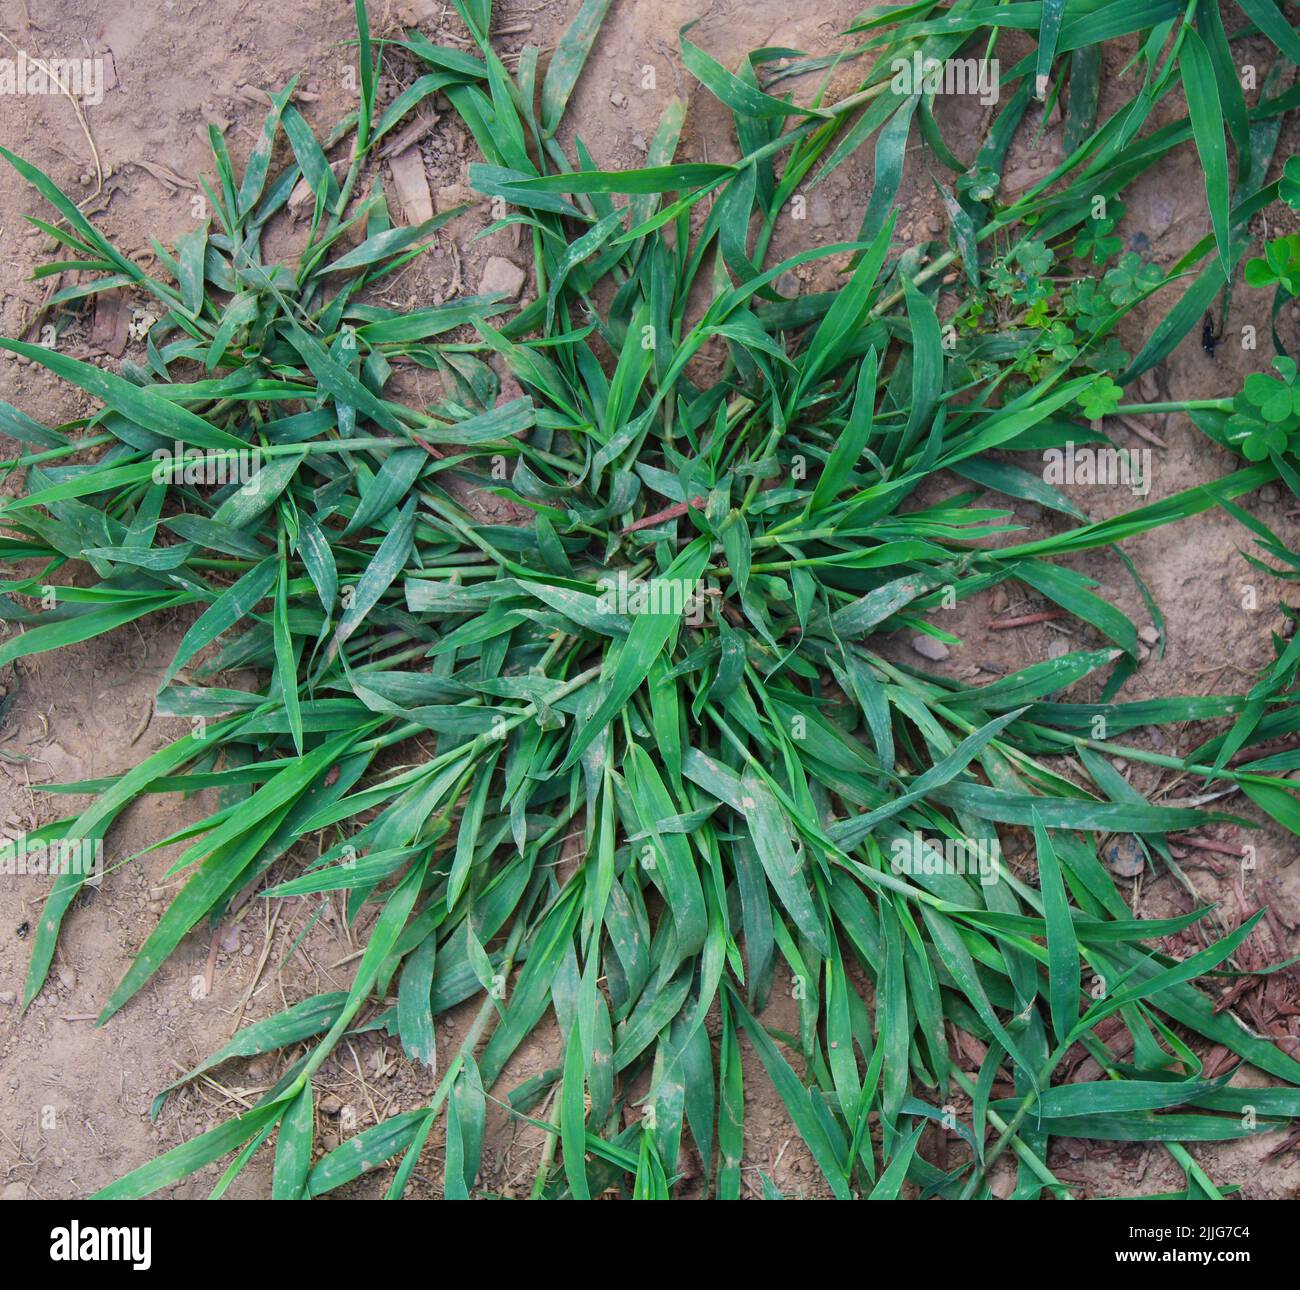 A Common Crabgrass Plant Growing in a Patch of Dirt Stock Photo